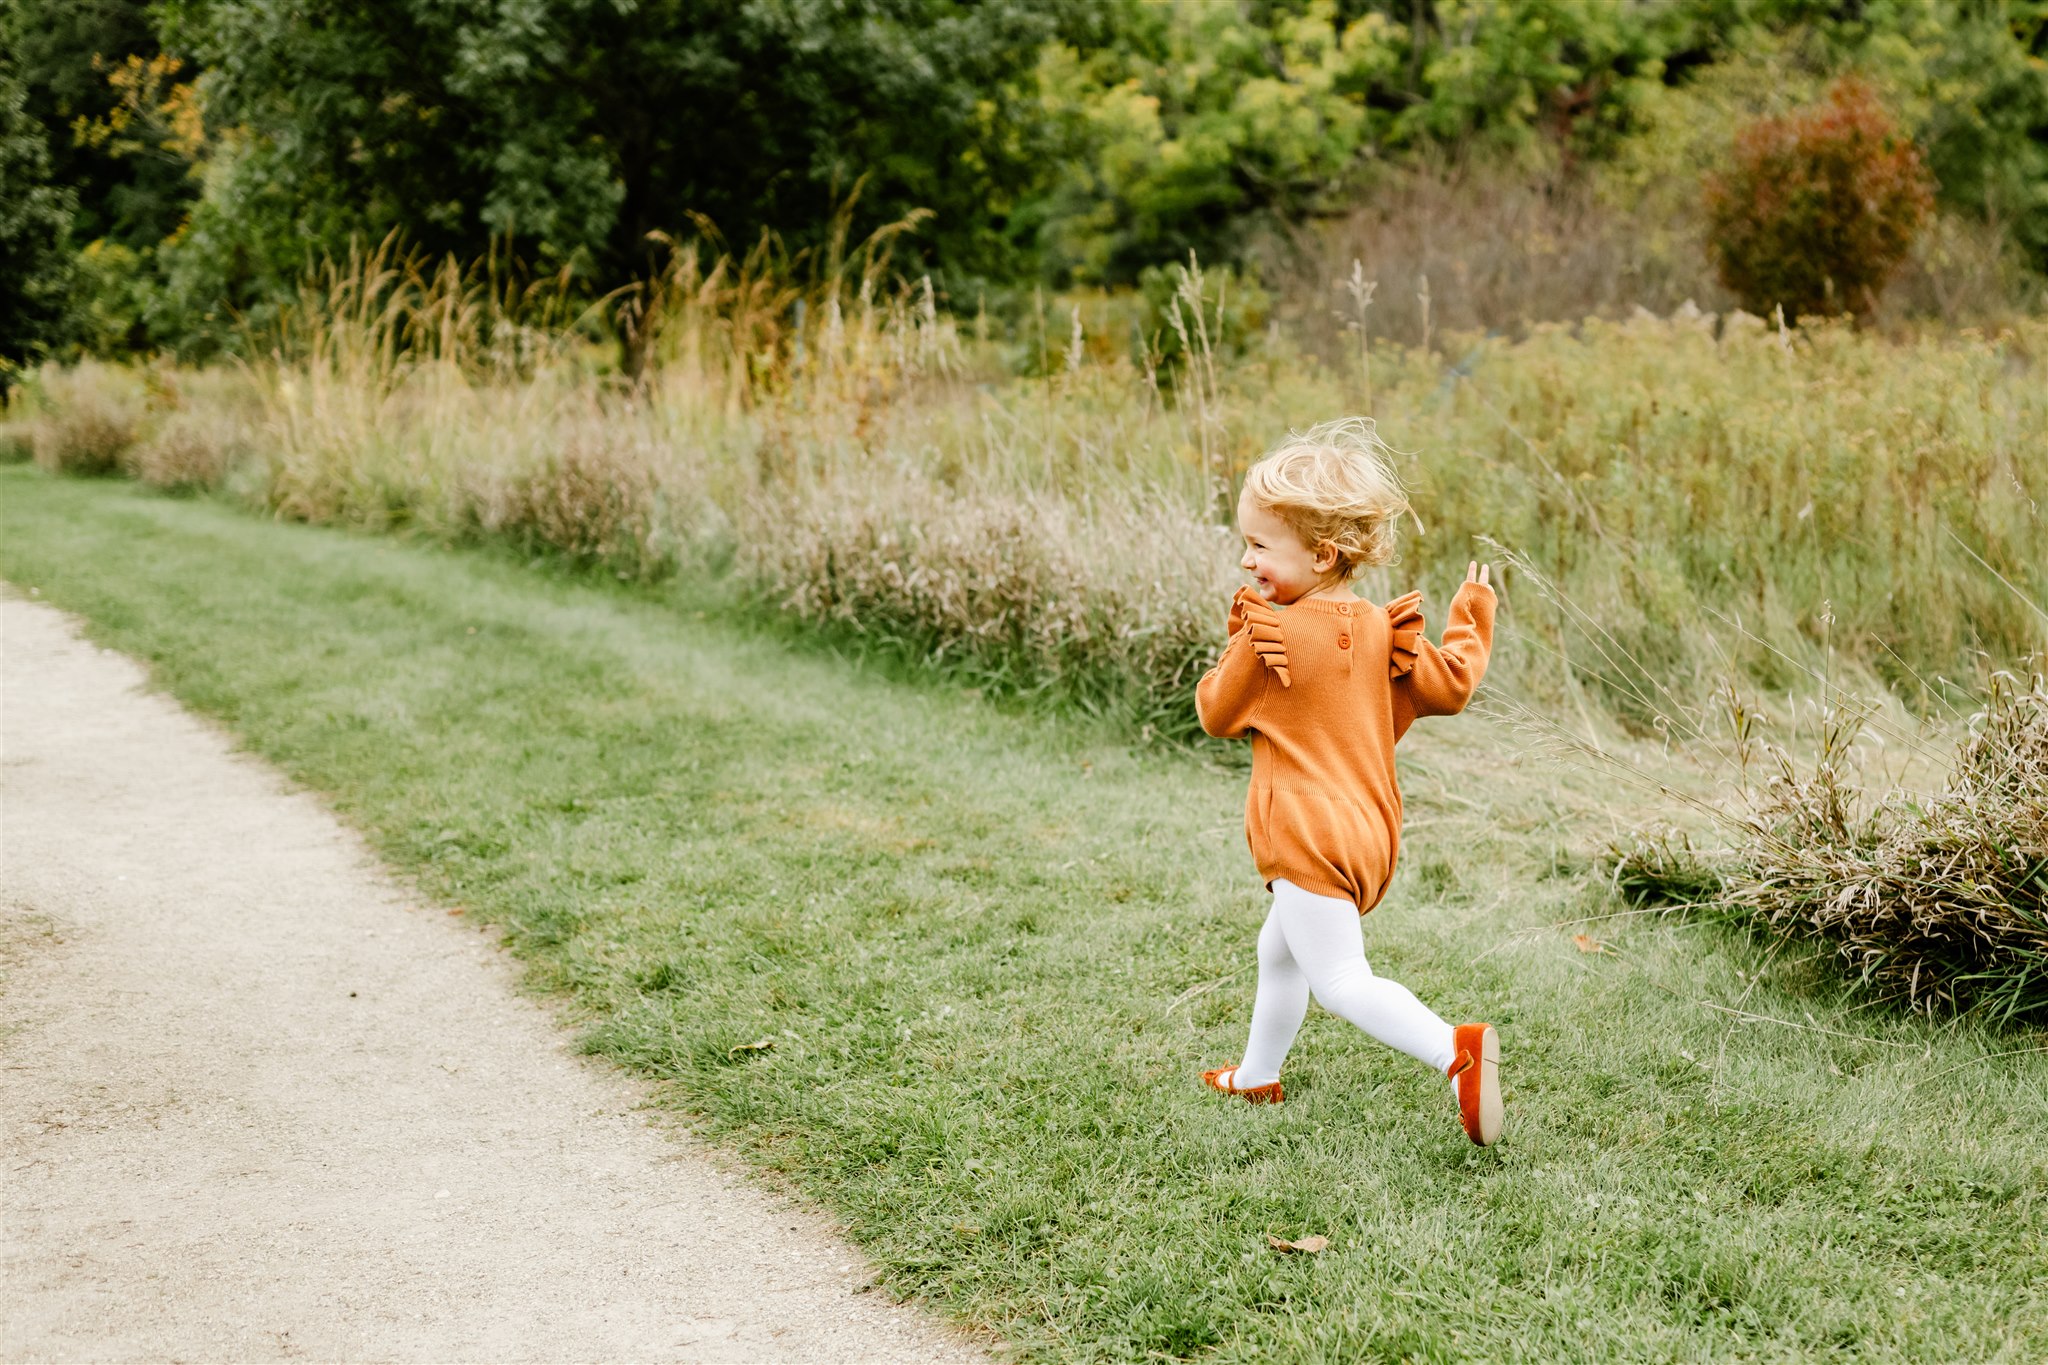 A young girl in an orange dress runs through a park trail while laughing before visiting Kid Friendly Restaurants Naperville